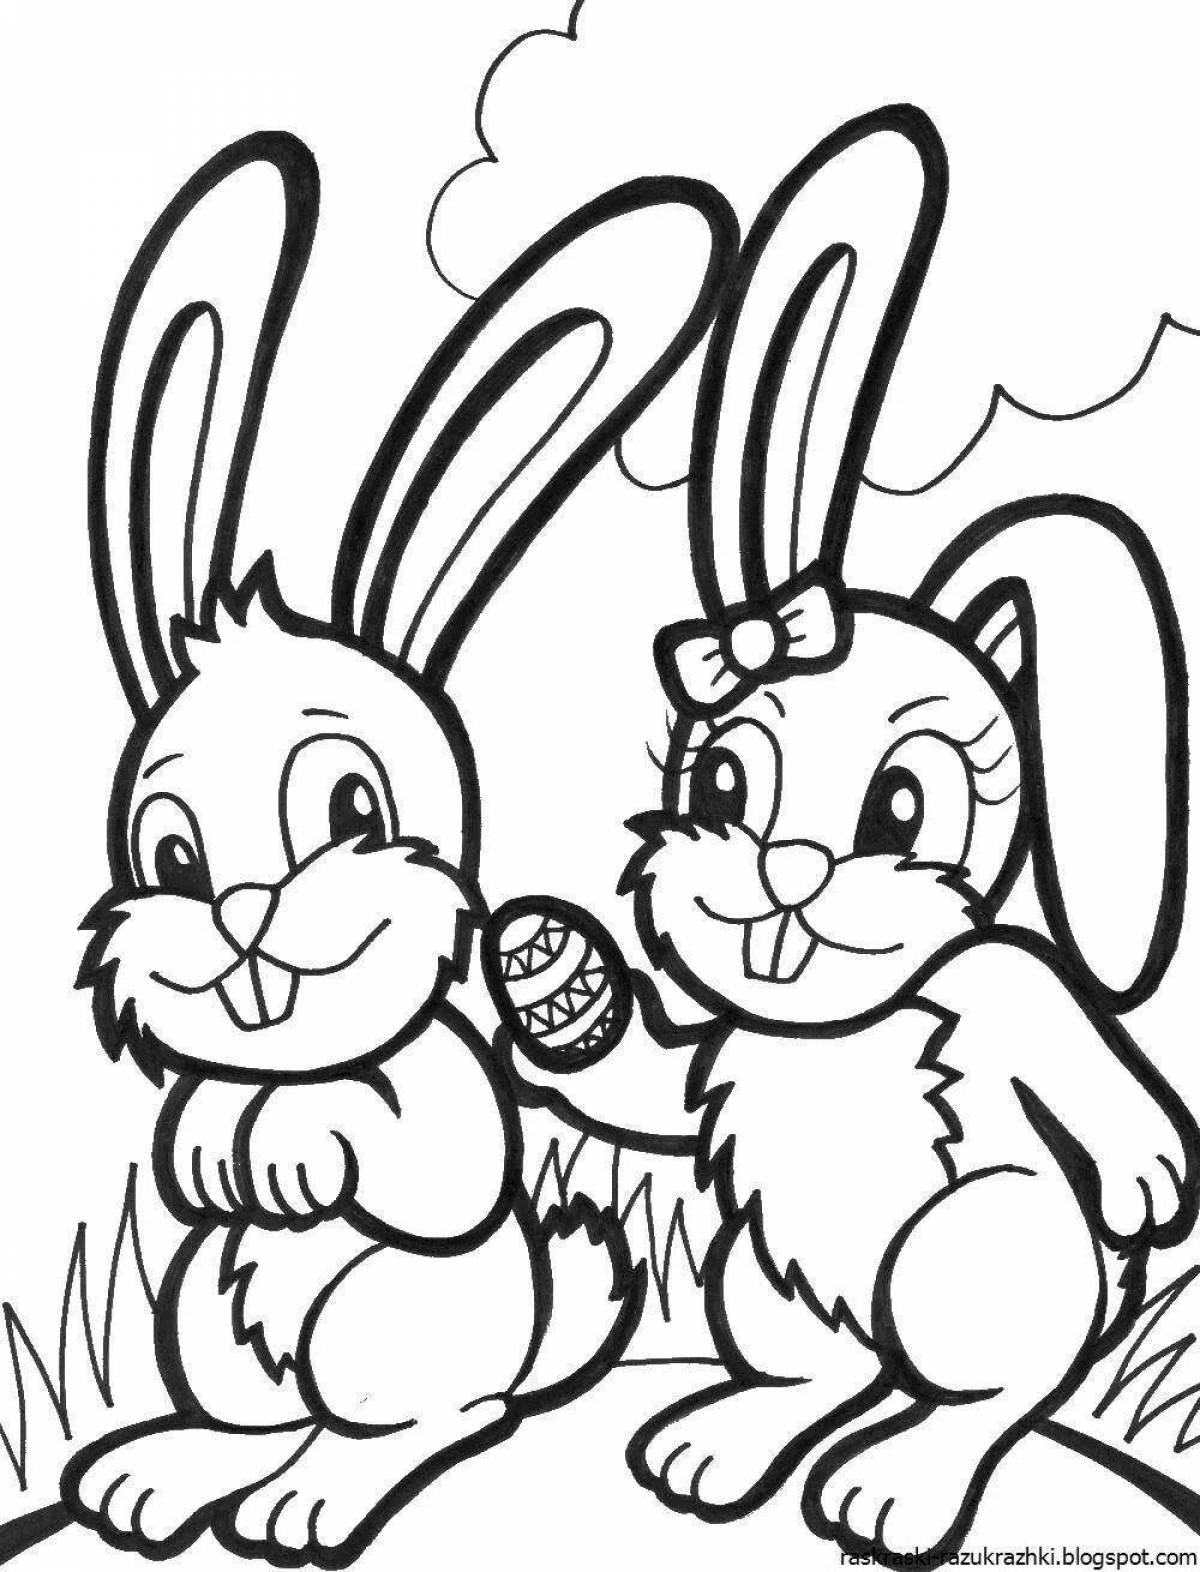 Exciting rabbit and squirrel coloring book